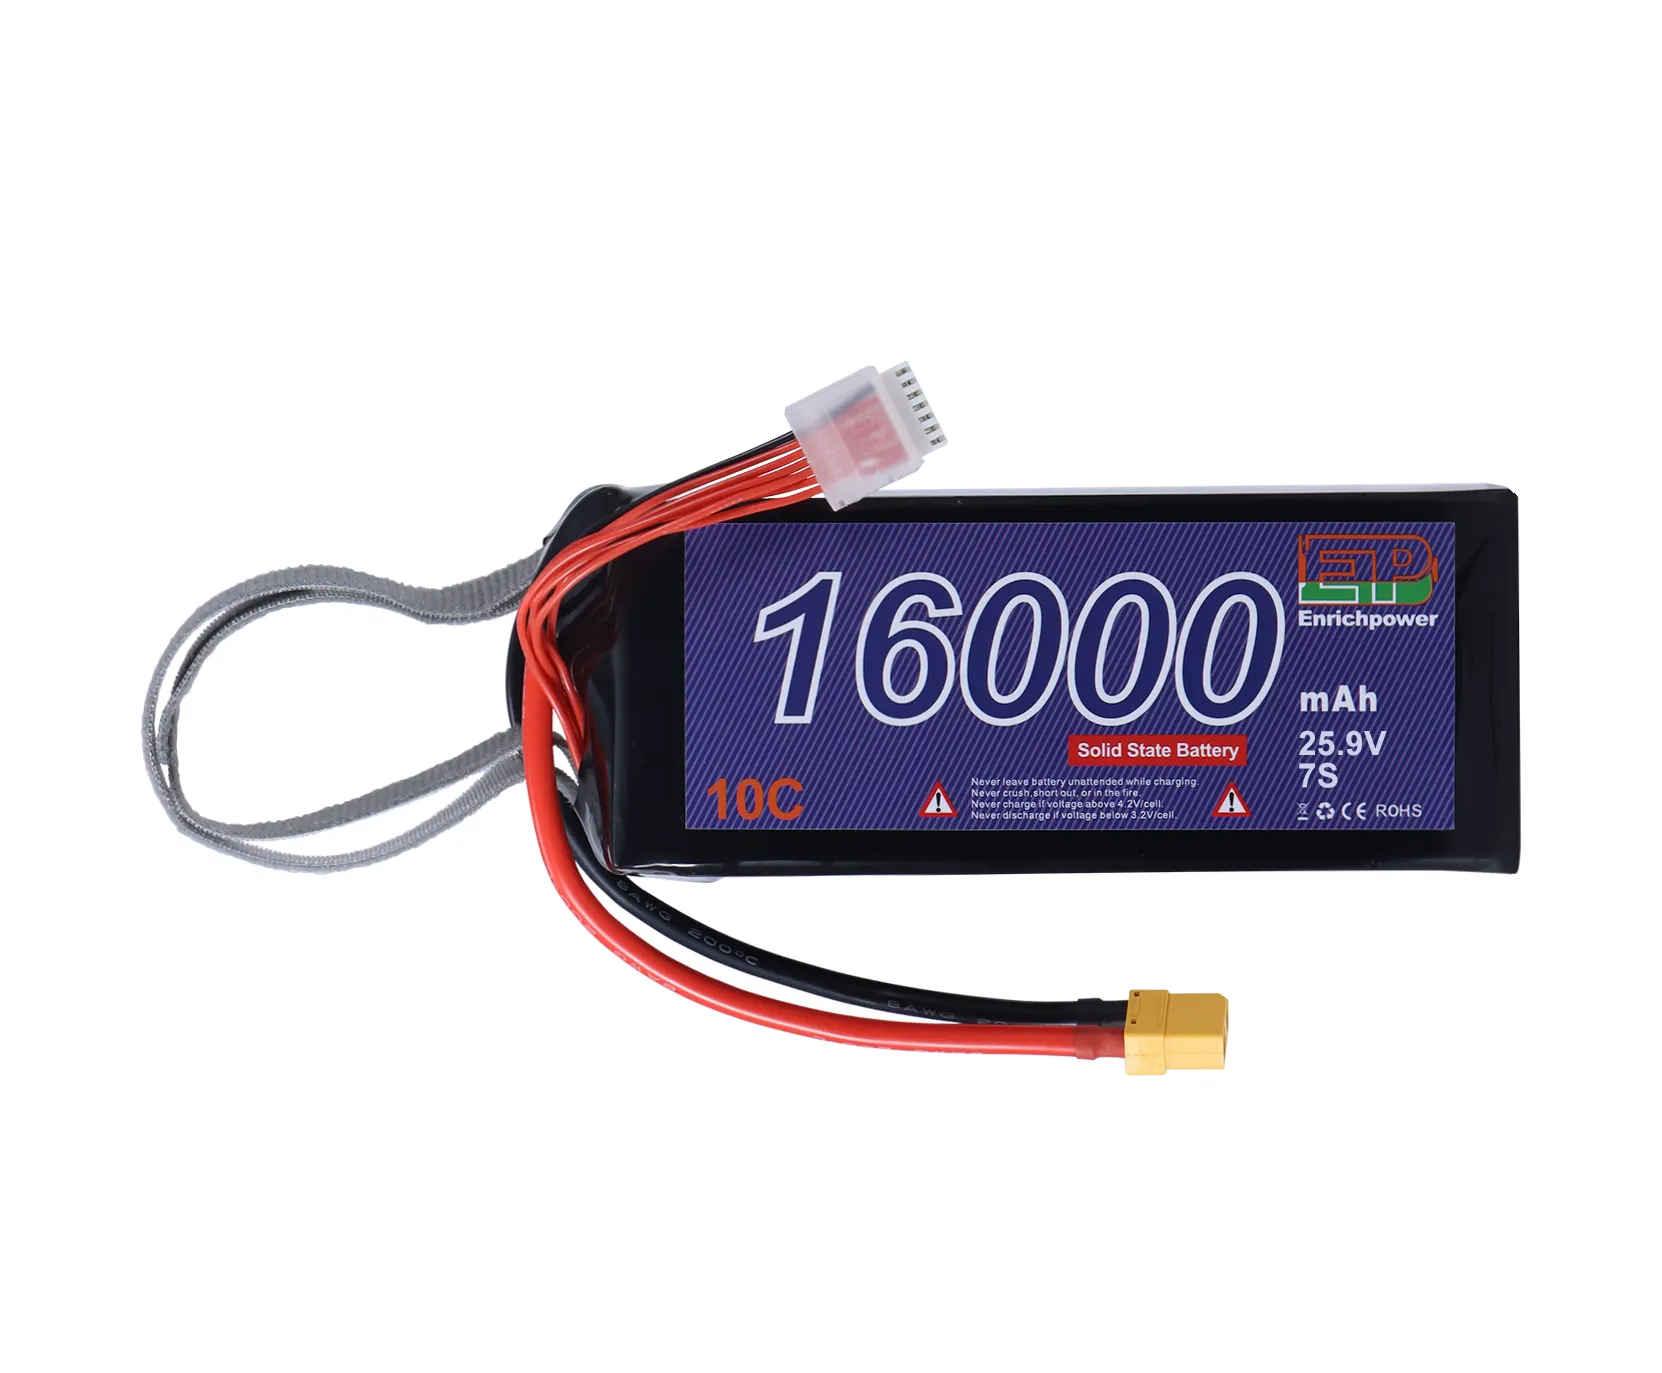 Over 800 Times High Energy Density 7S Lipo 25.9V 16000mah 10C New Material Semi Solid State Maker Drone Battery Pack